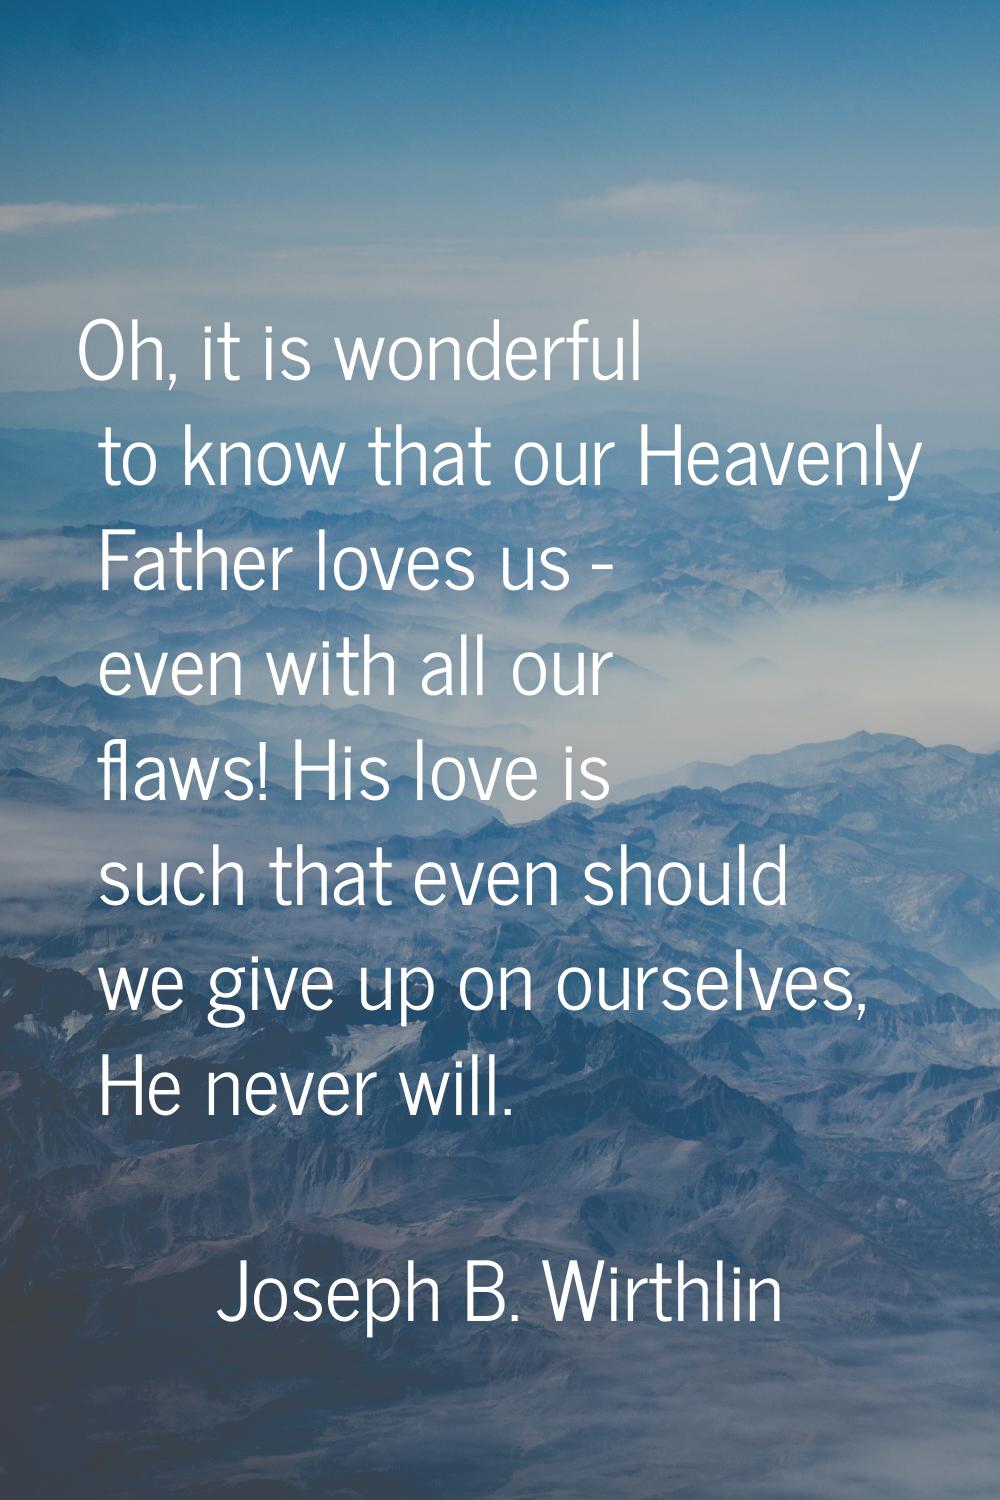 Oh, it is wonderful to know that our Heavenly Father loves us - even with all our flaws! His love i